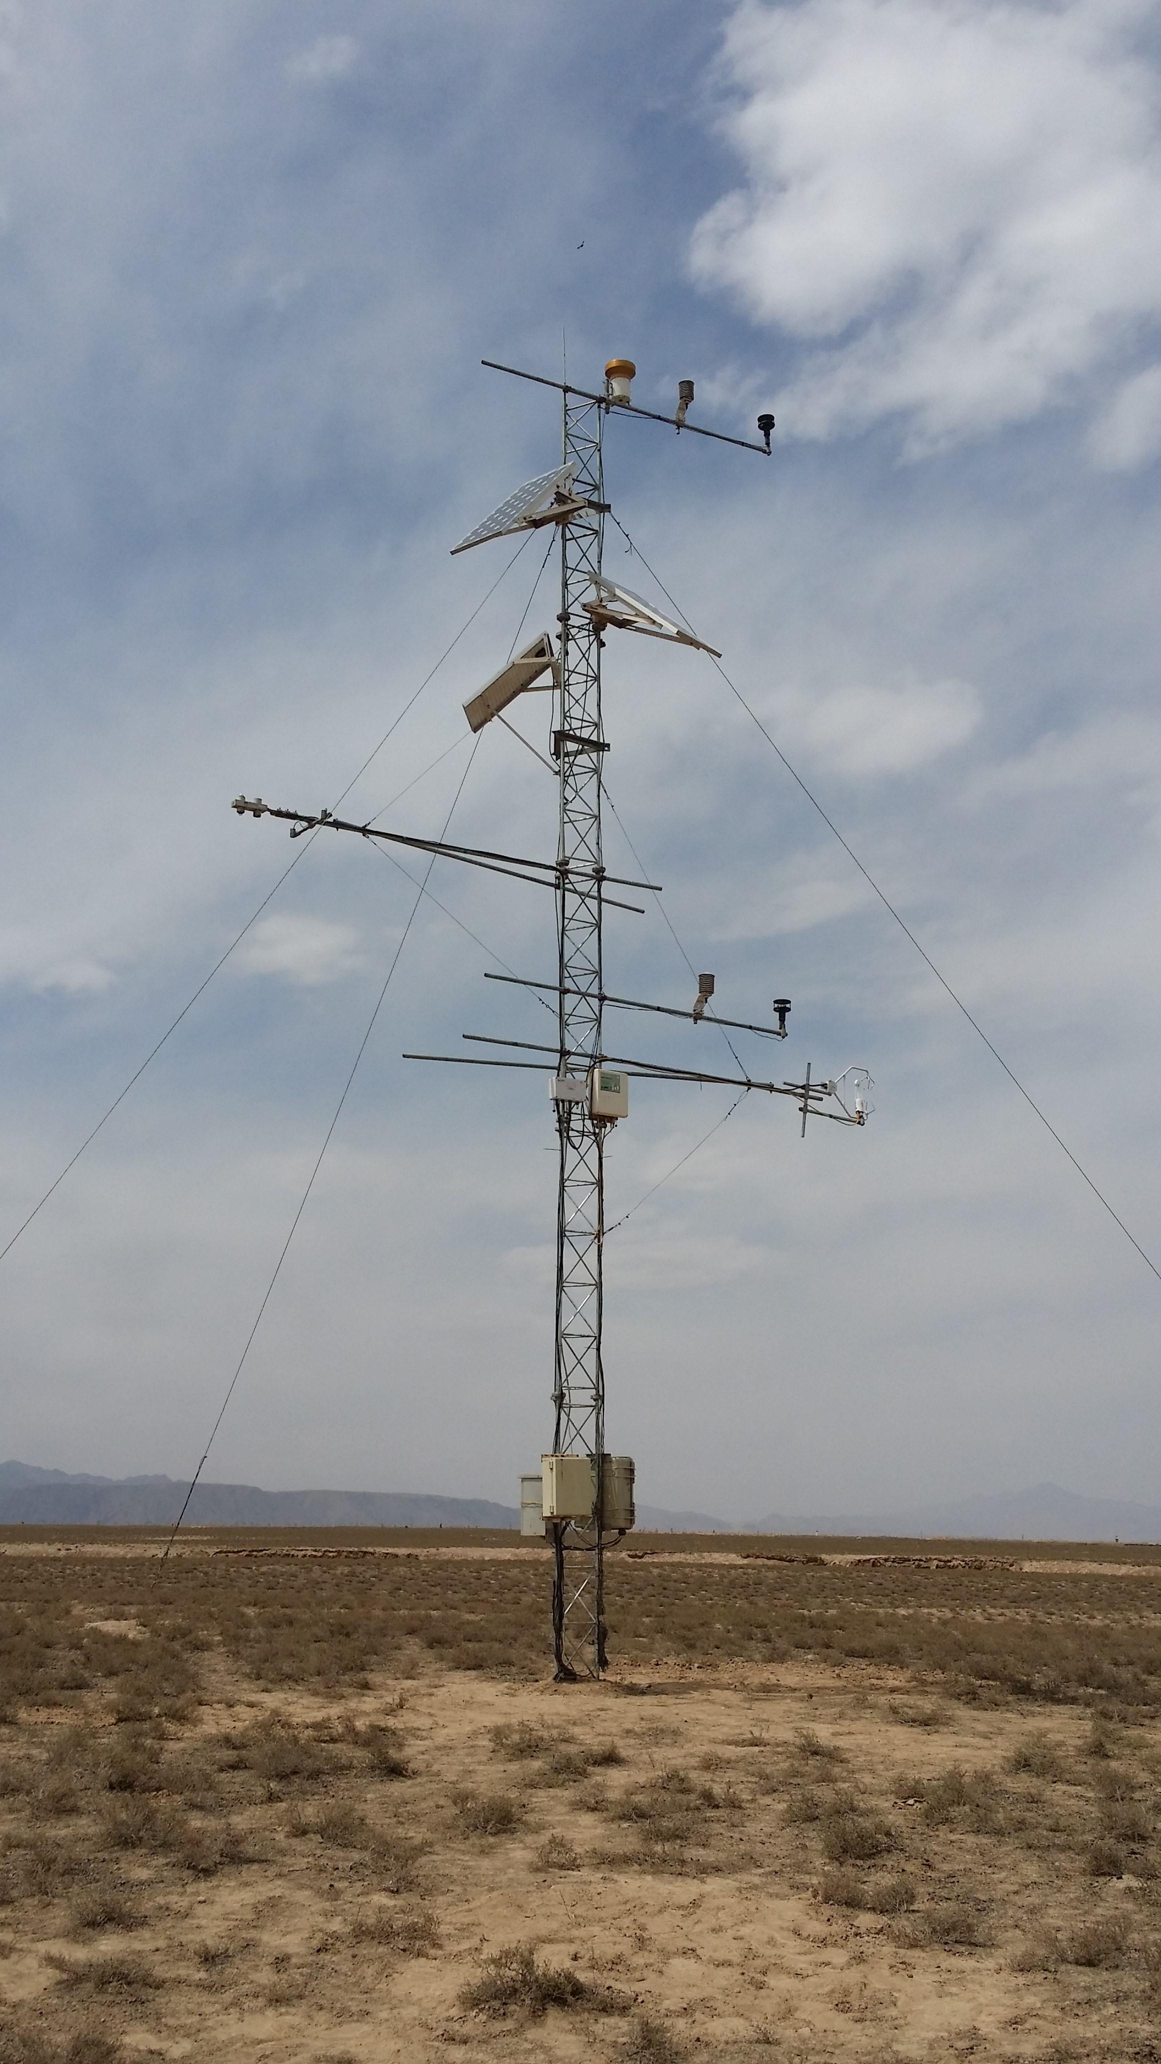 Qilian Mountains integrated observatory network: Dataset of the Heihe River Basin integrated observatory network (automatic weather station of Huazhaizi desert steppe station, 2018)